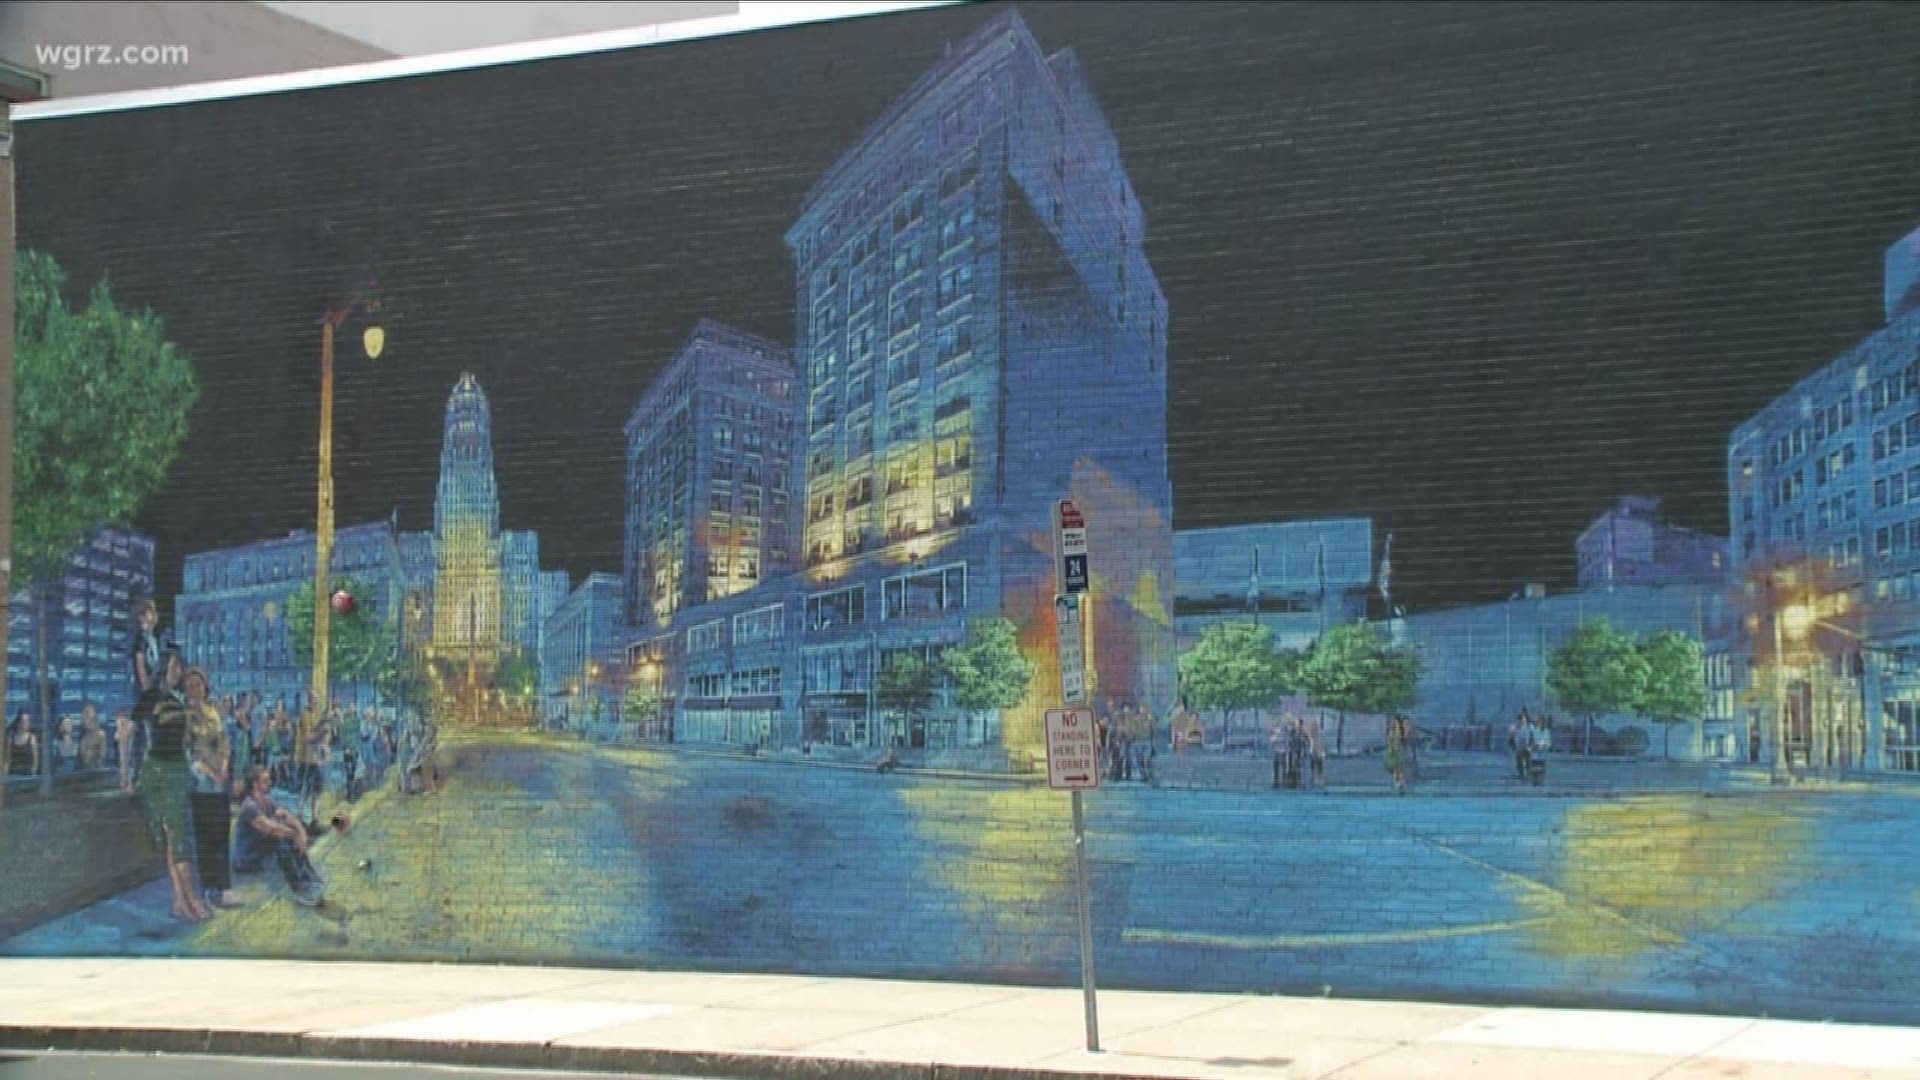 The mural here is called "Walking Back Time" and it's at the corner of East Huron and Washington downtown.